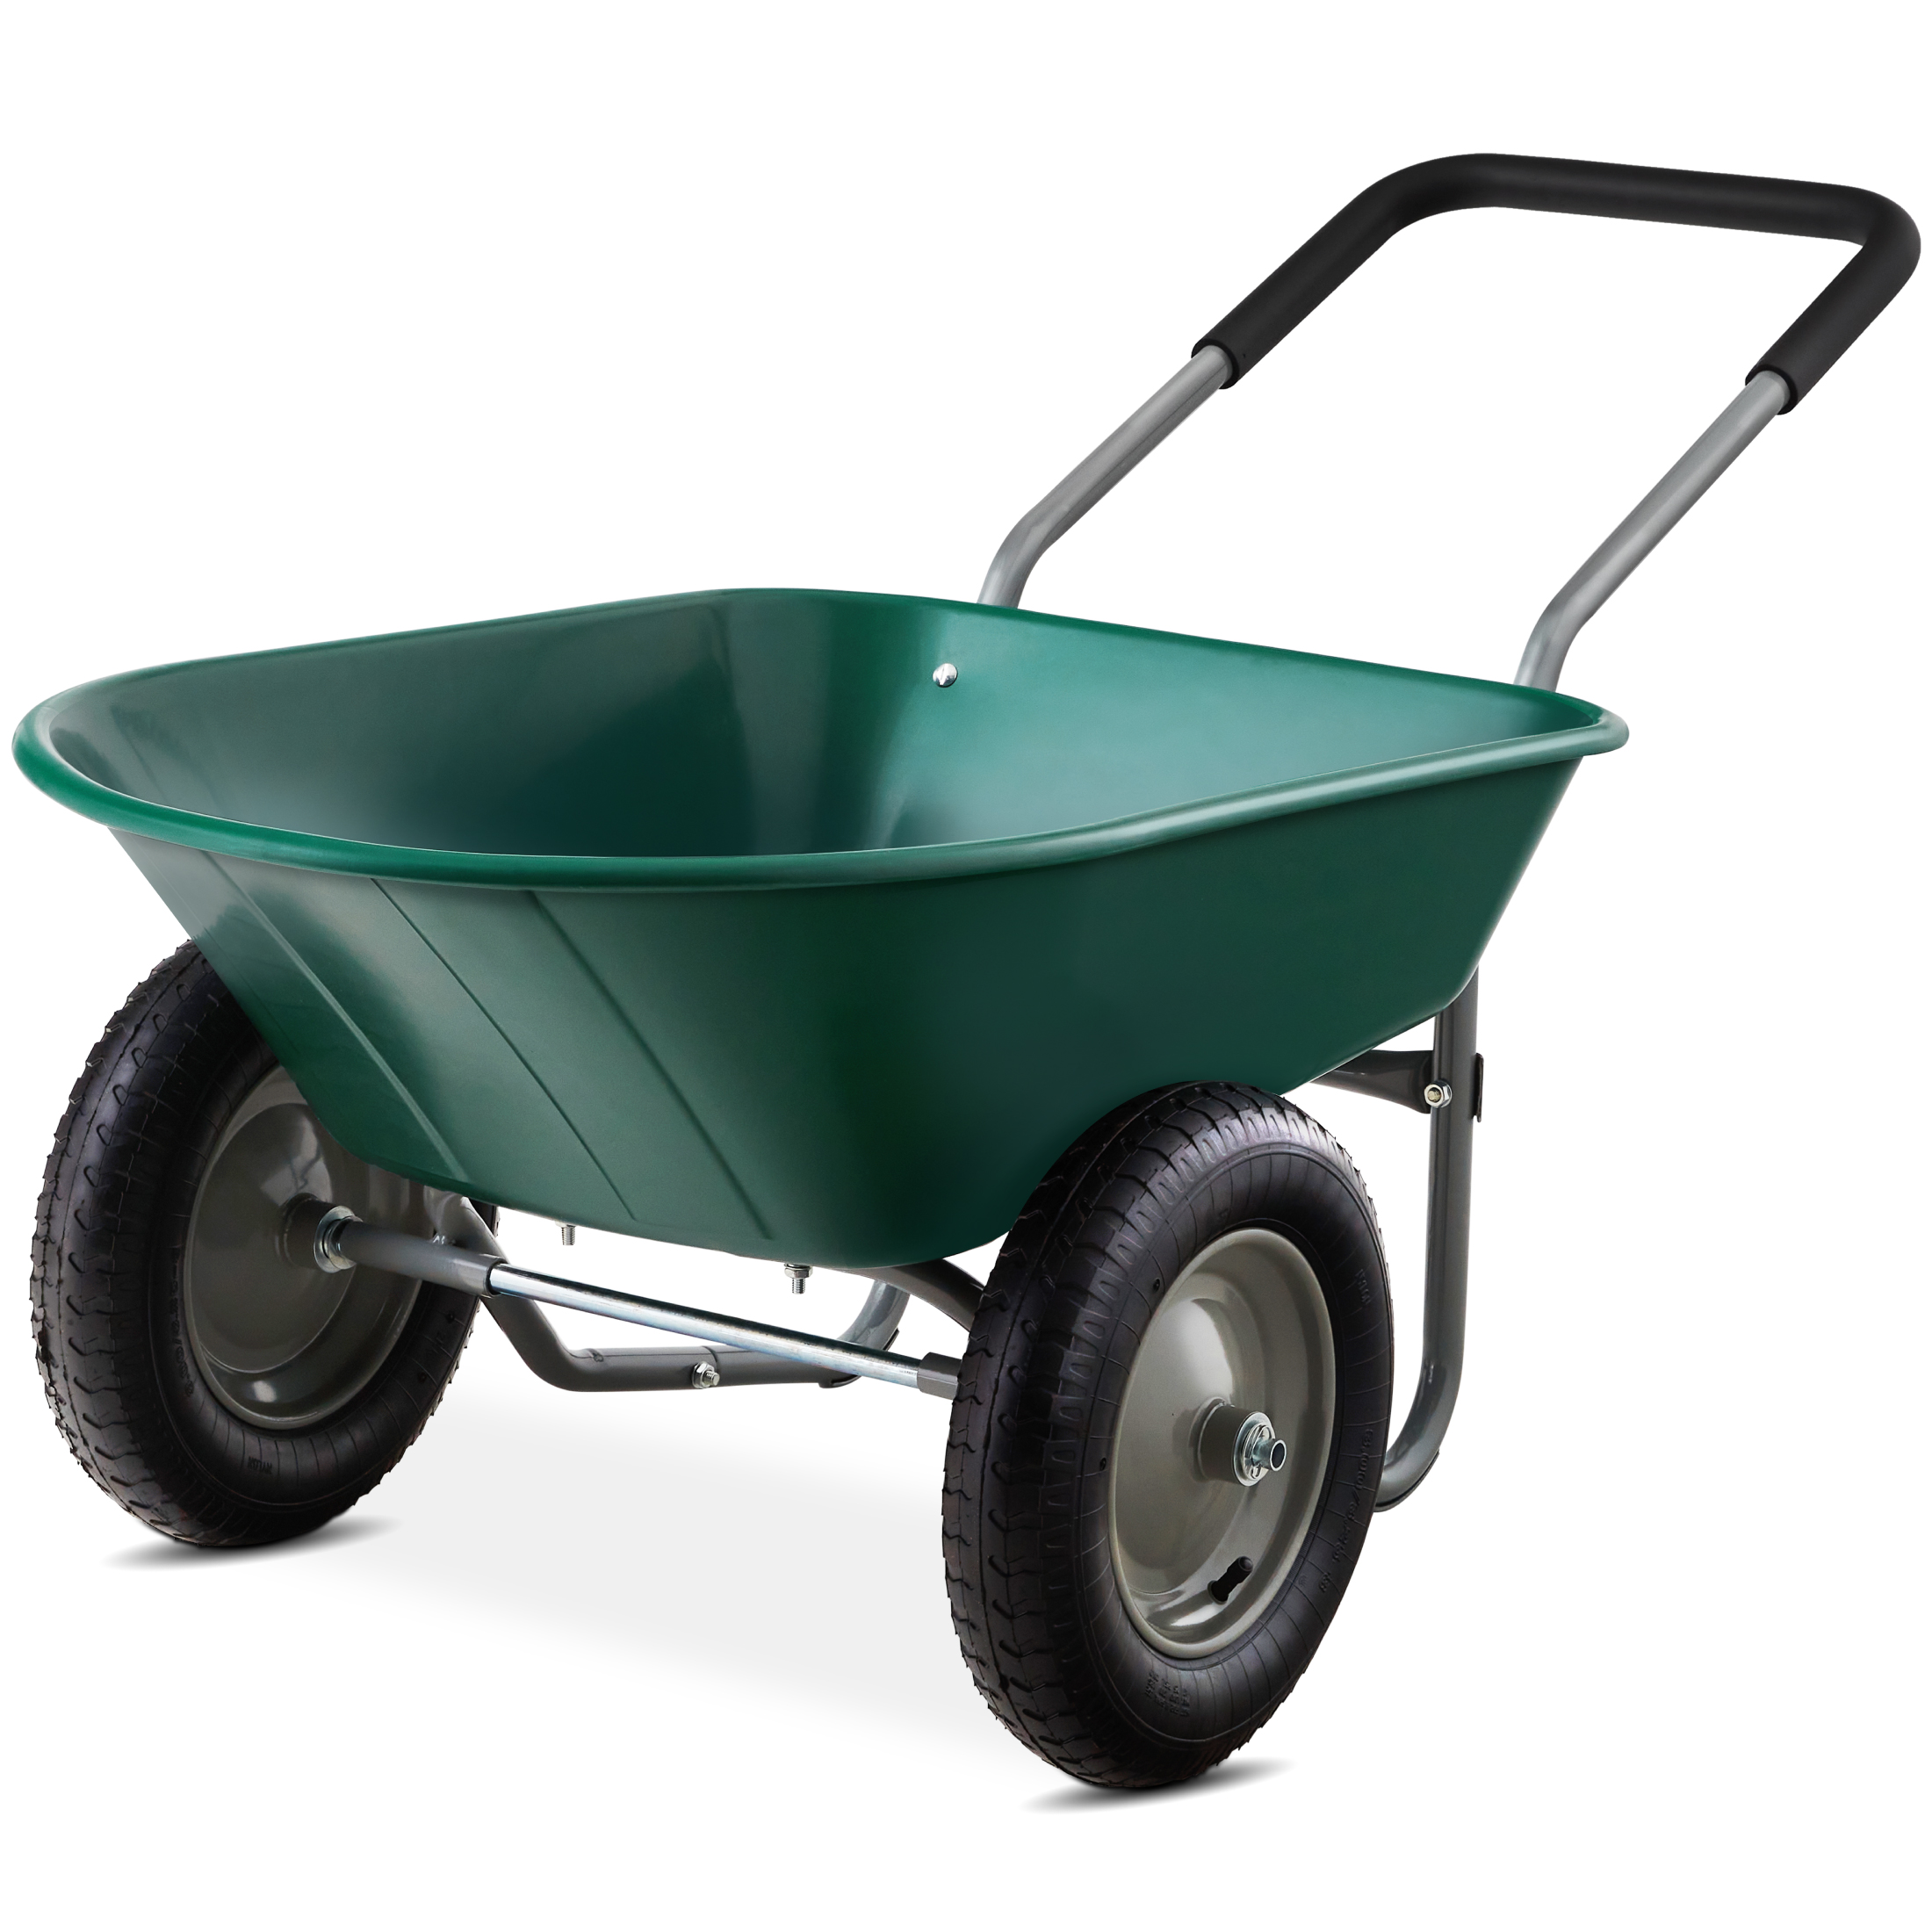 Best Choice Products Dual-Wheel Home Wheelbarrow Yard Garden Cart for Lawn, Construction - Green - image 1 of 8